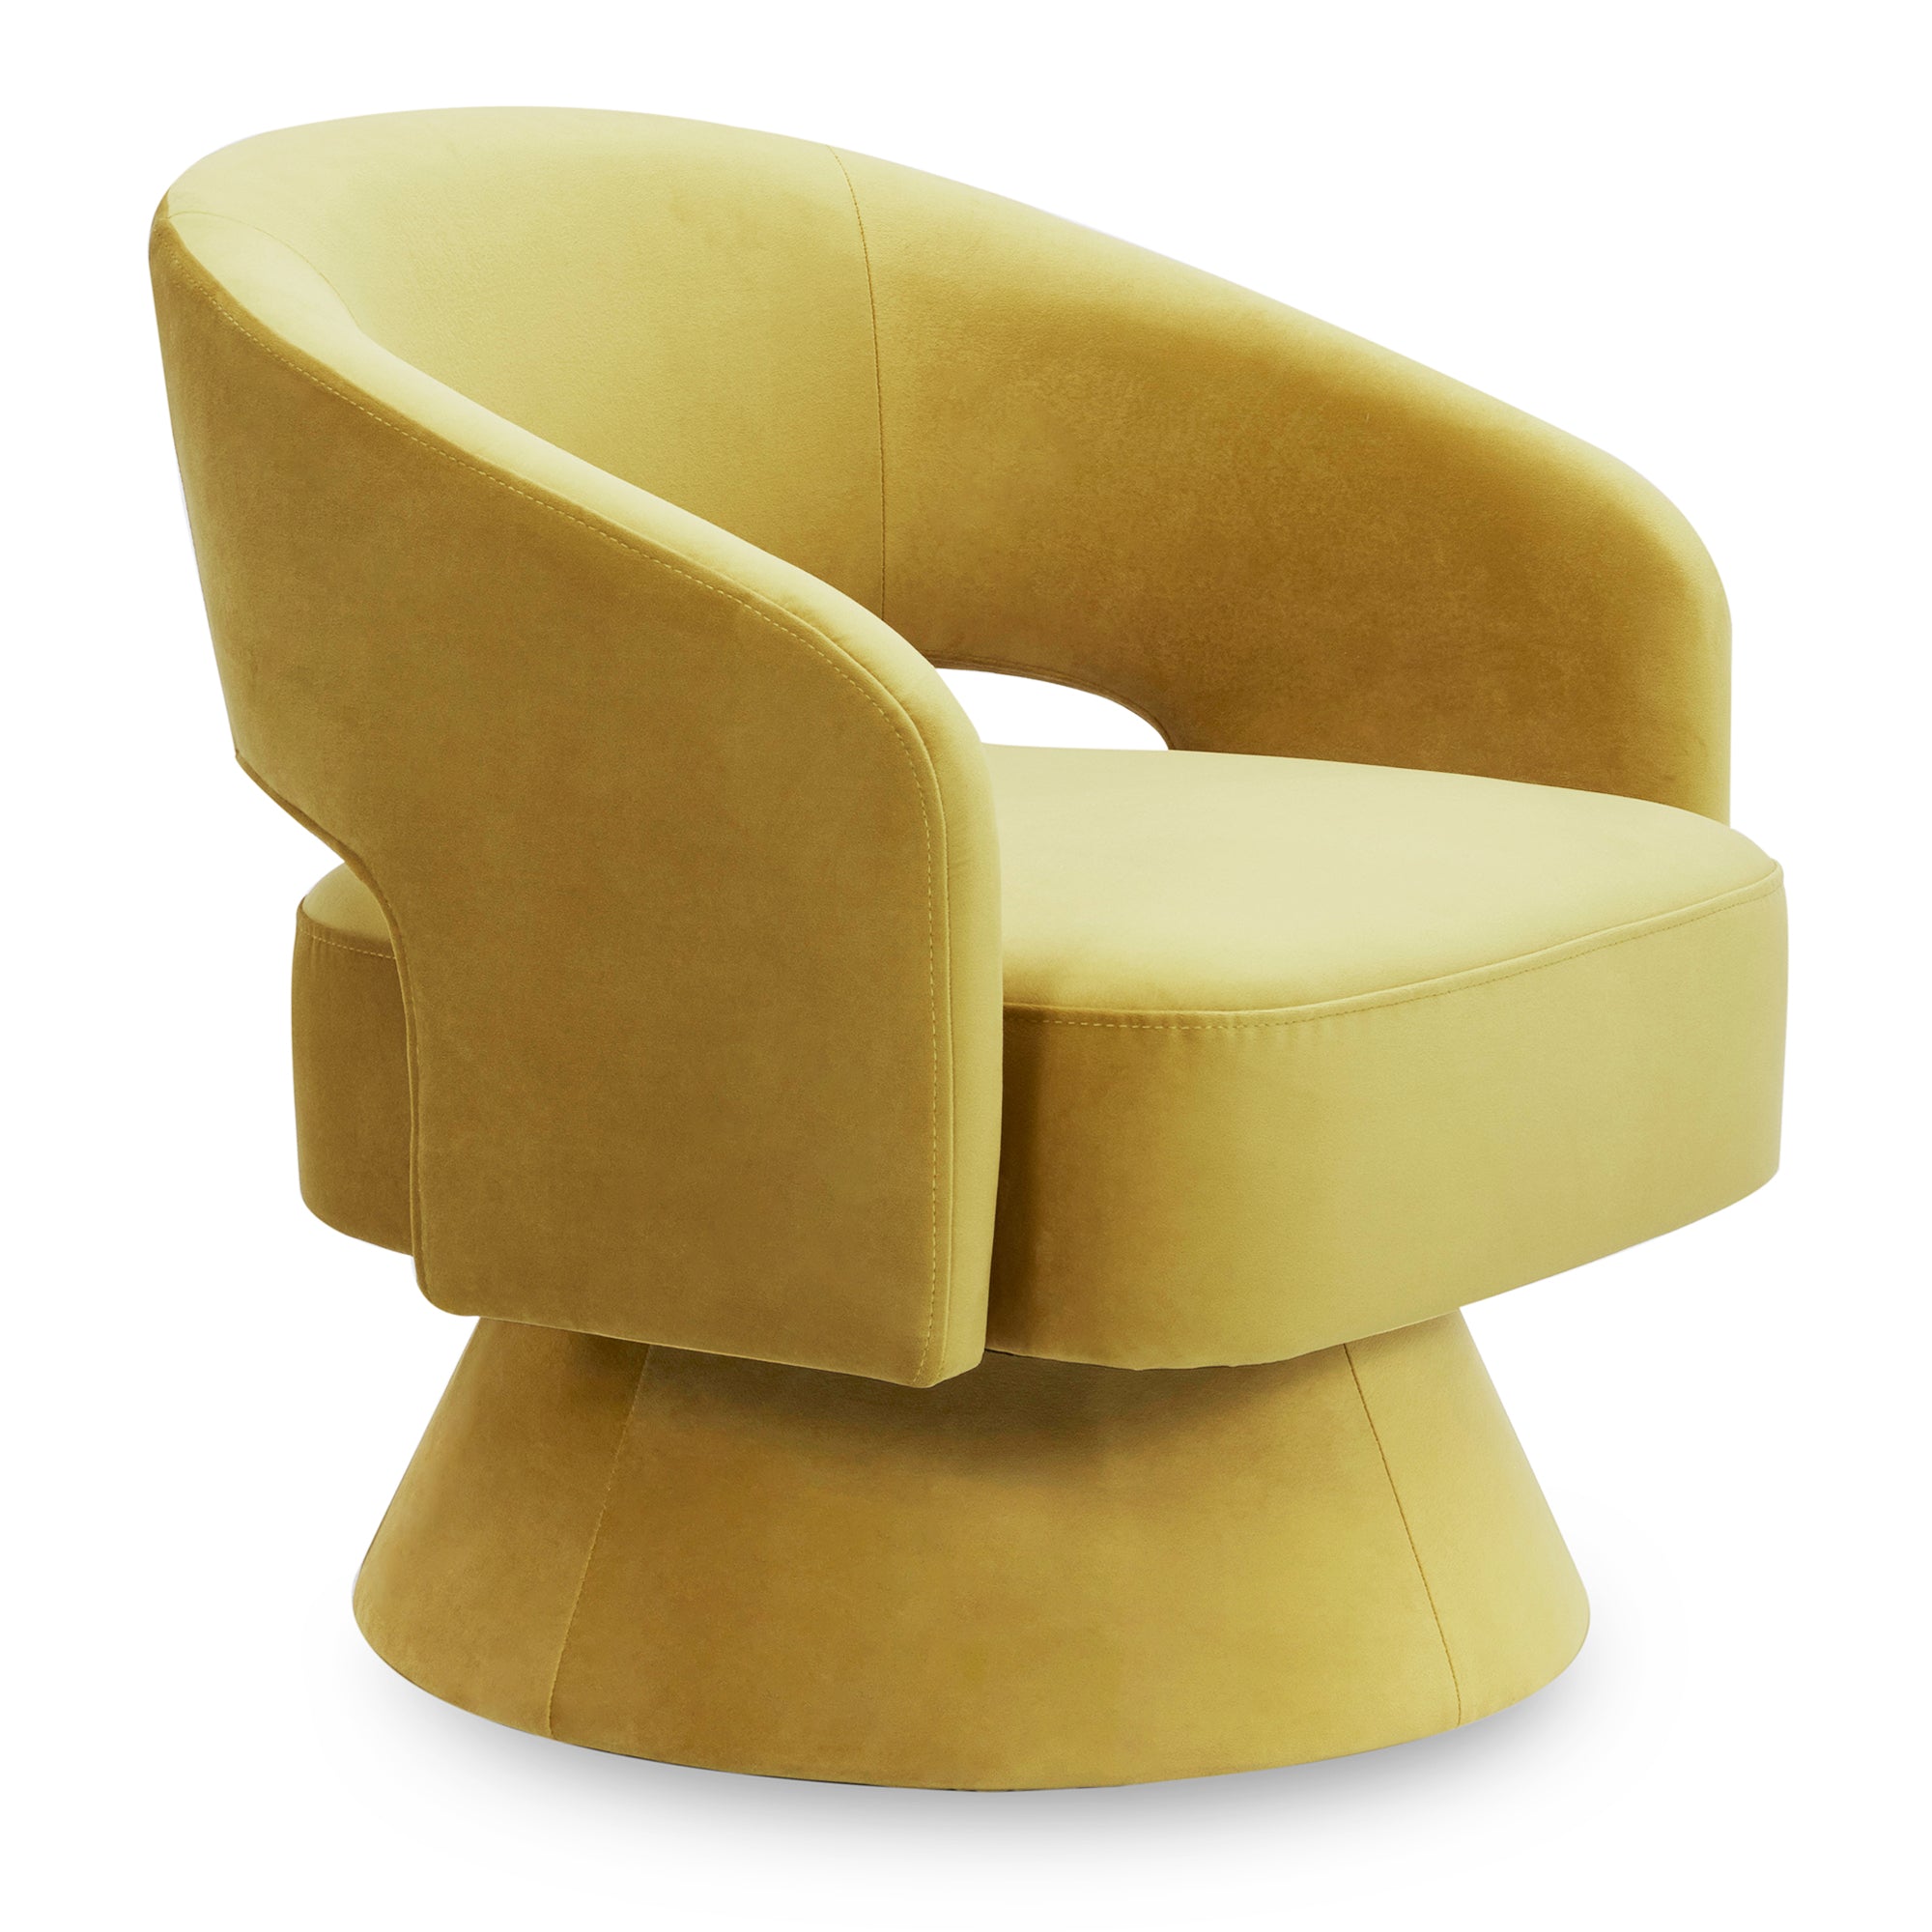 CHITA LIVING-Ambre Swivel Accent Chair-Accent Chair-Velvet-Yellow-